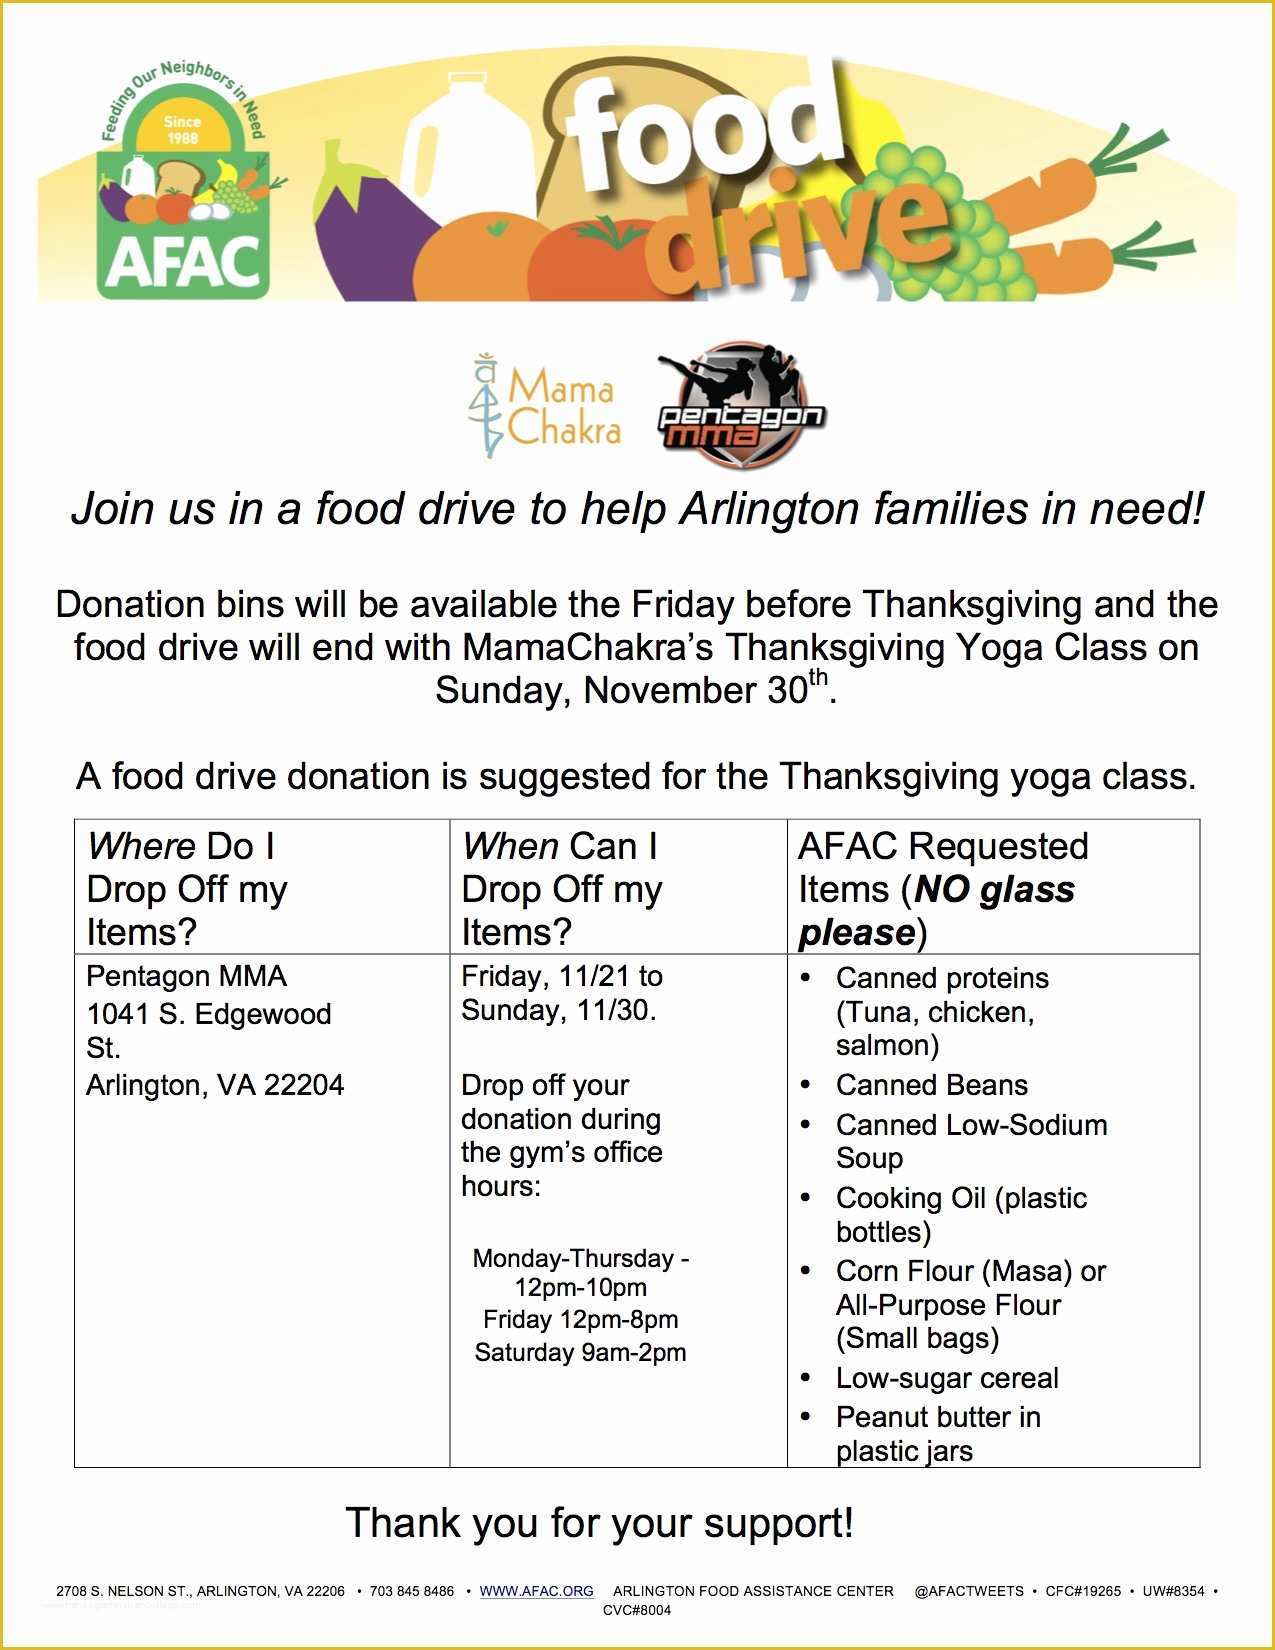 Free Thanksgiving Food Drive Flyer Template Of Pentagon Mixed Martial Arts Llc — Thanksgiving Food Drive